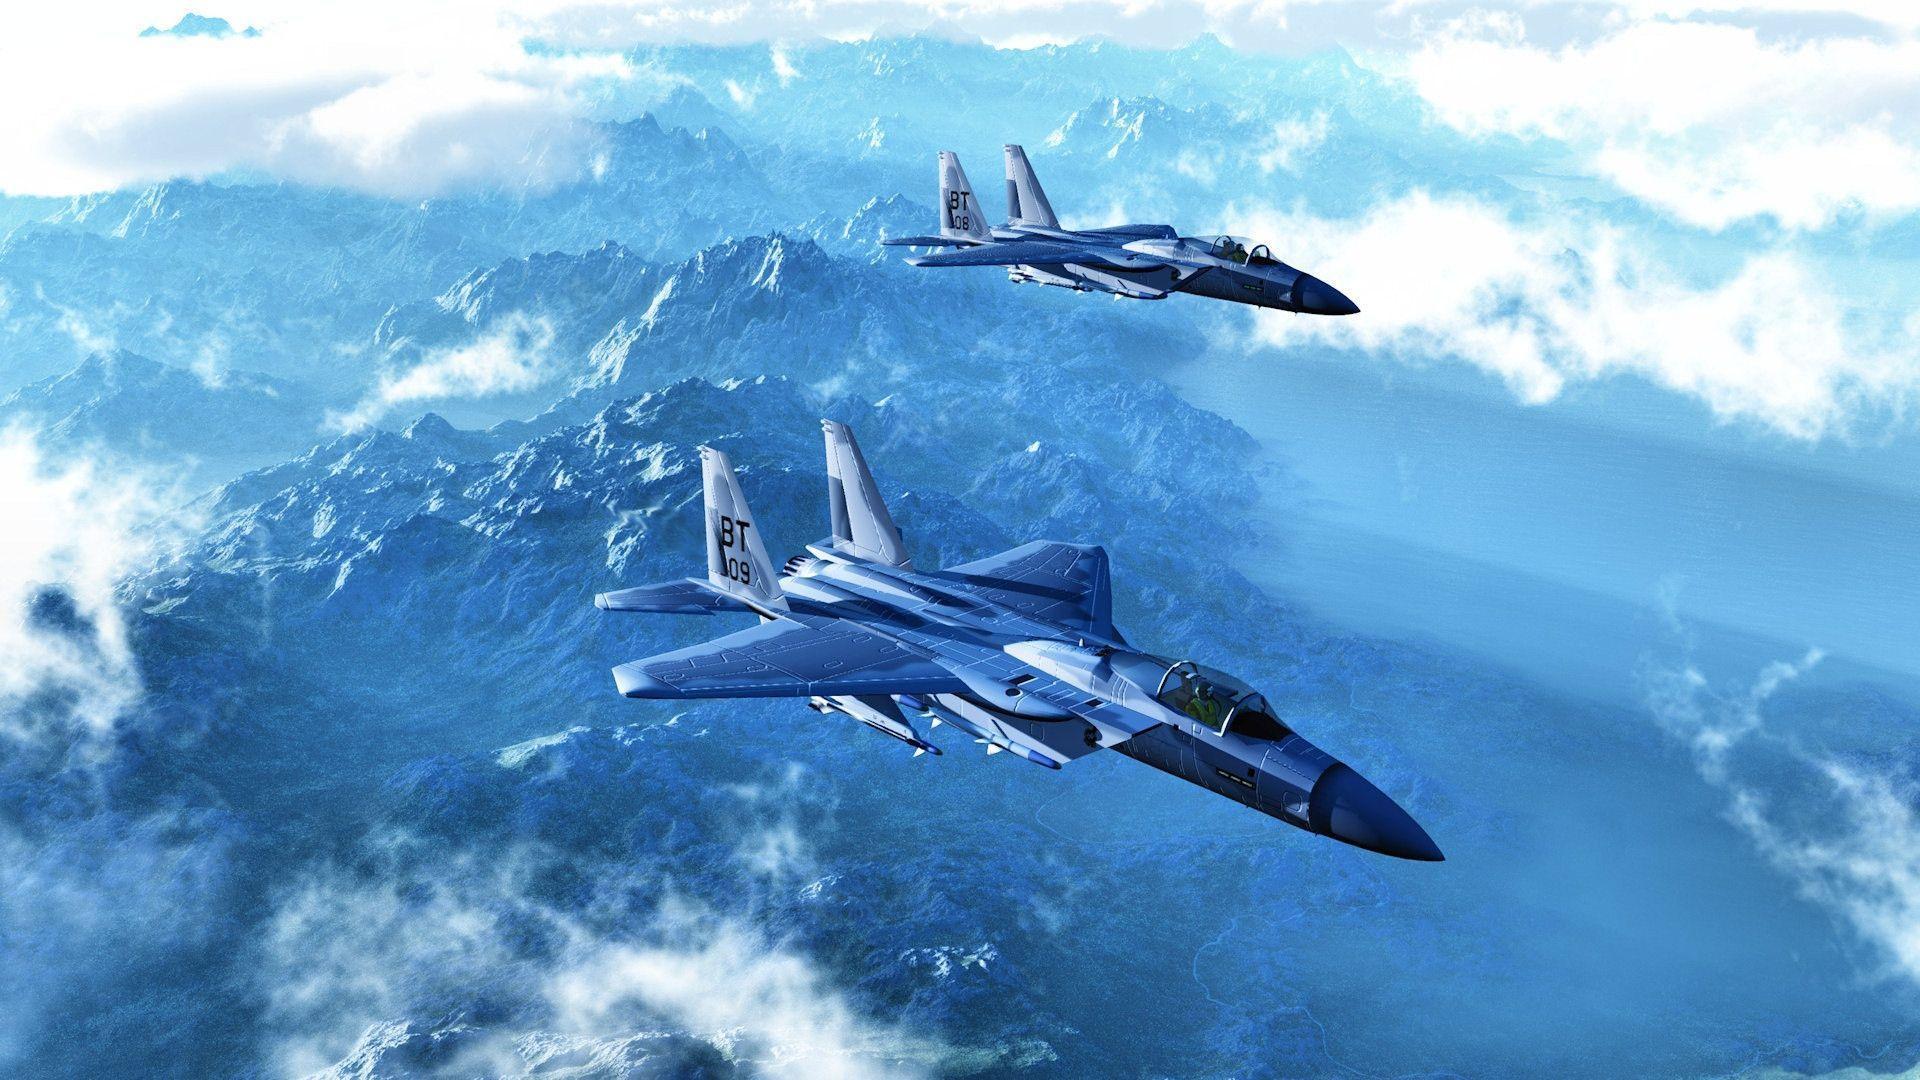 Best Wallpaper 1920x1080, Two Fighter Jets Flying In